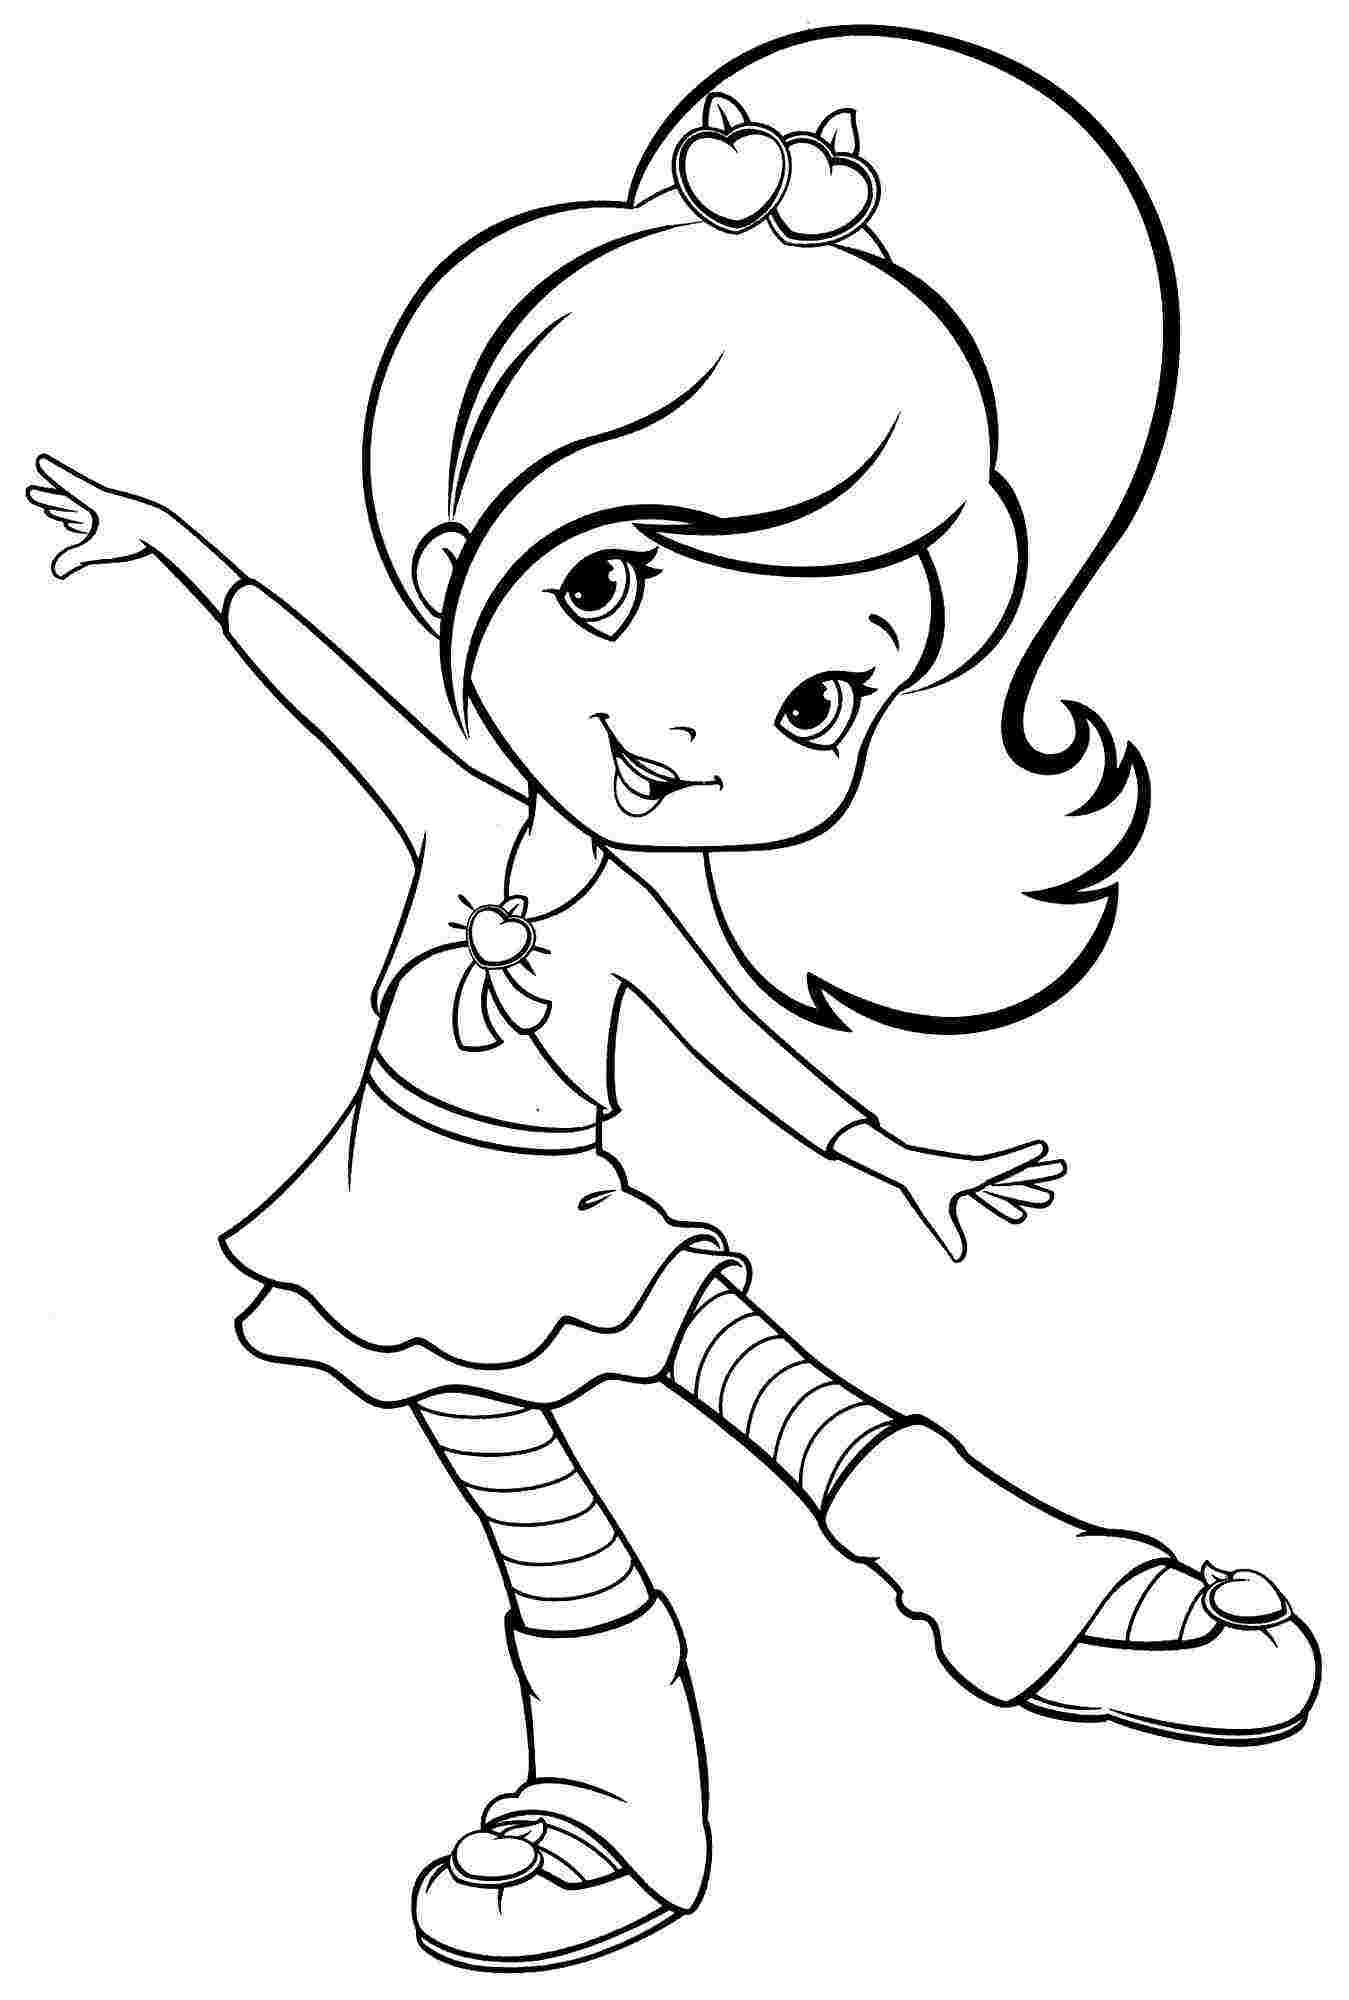 Coloring pages for toddlers girl – Huangfei.info